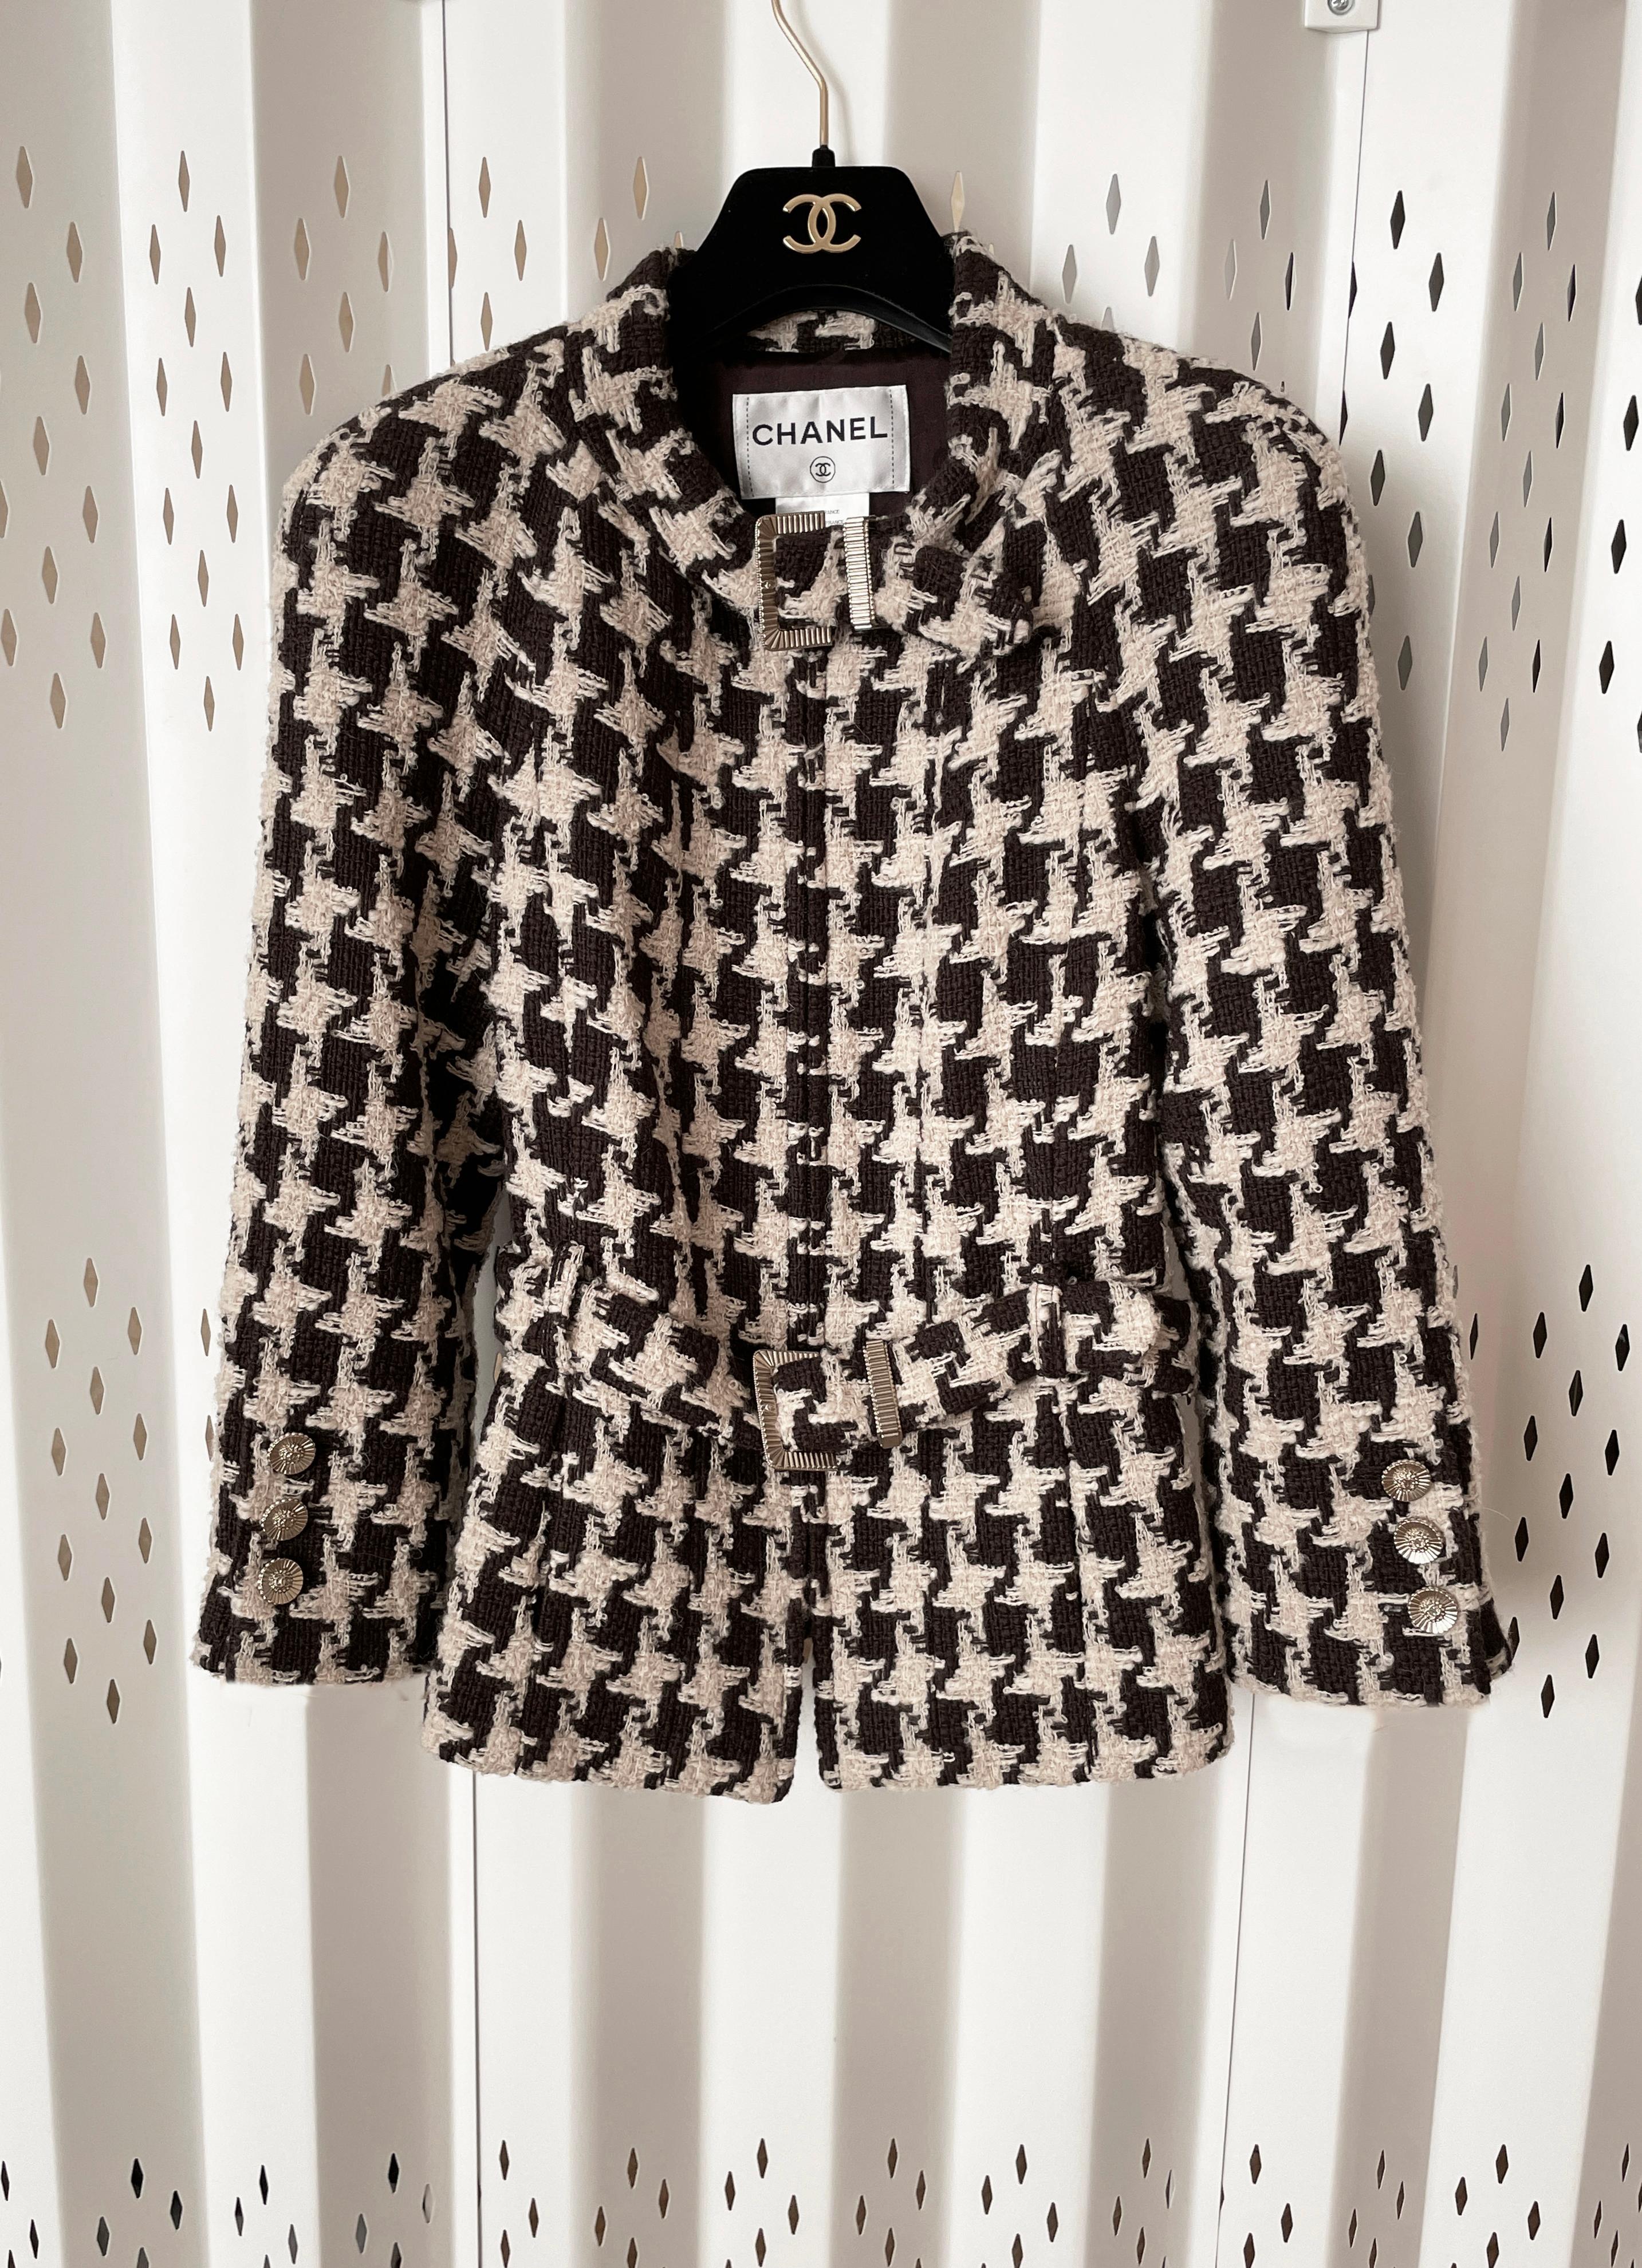 New Chanel houndstooth tweed jacket with belt. Size mark 38 FR, kept unworn.
- Two belts with CC logo buckle (at waist and at collar, both are remoavble)
- CC logo buttons at cuffs
- front zip closure
- full silk lining with camellias and chain link